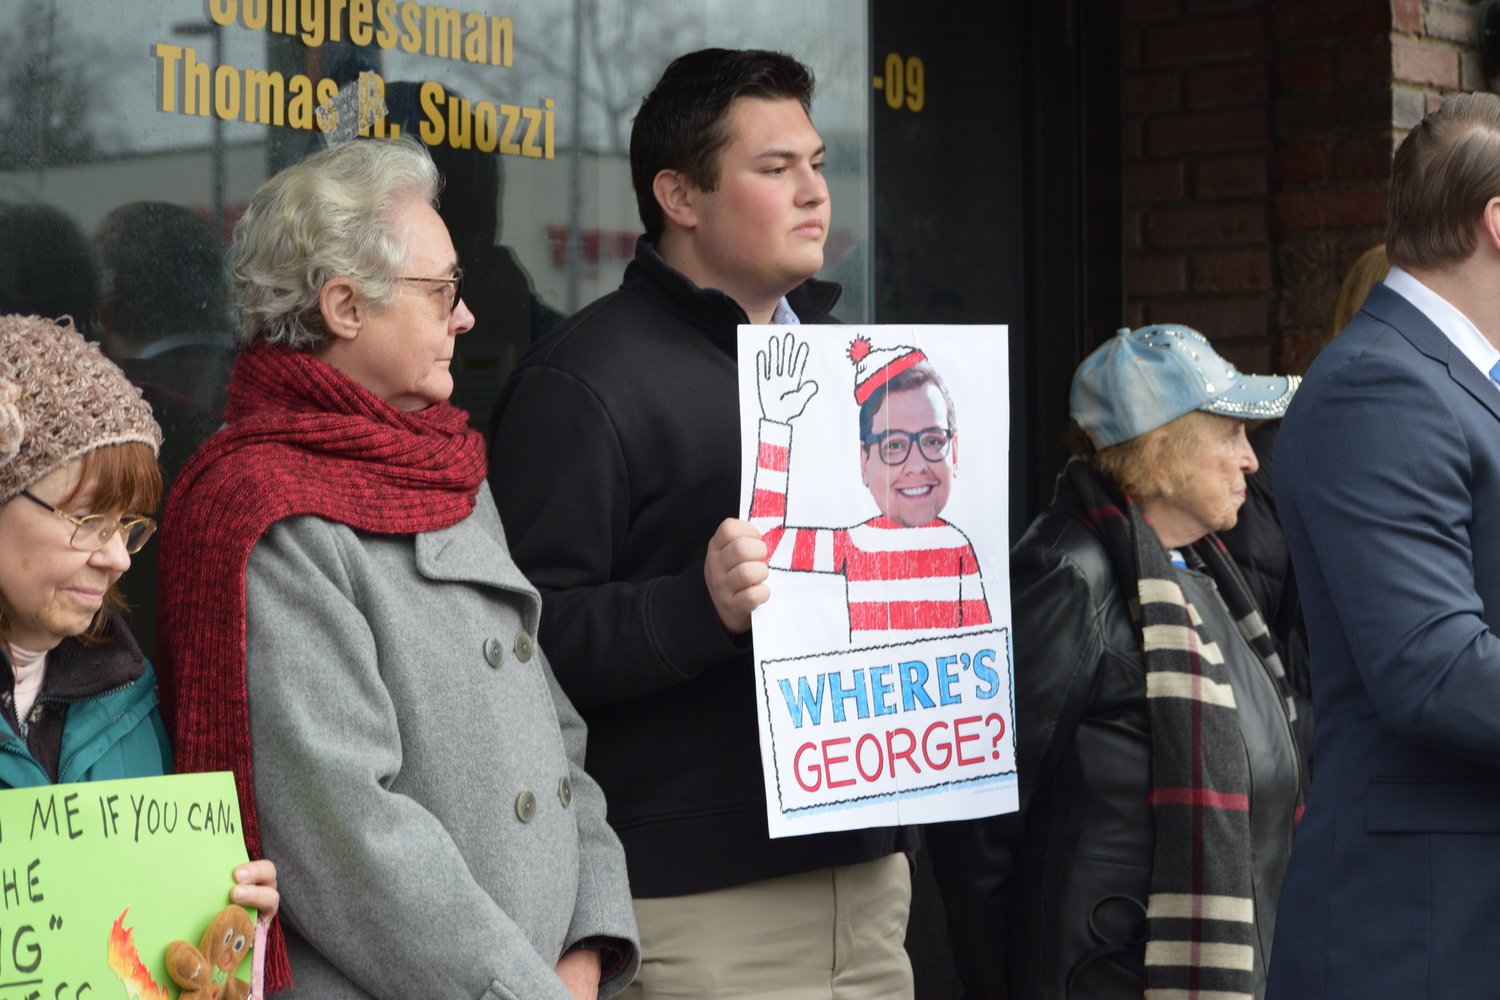 Aidan Davis, a leader of the group Concerned Citizens of NY-03, with a sign likening U.S. Rep. George Santos’s reluctance to appear in public to ‘Where’s Waldo?’